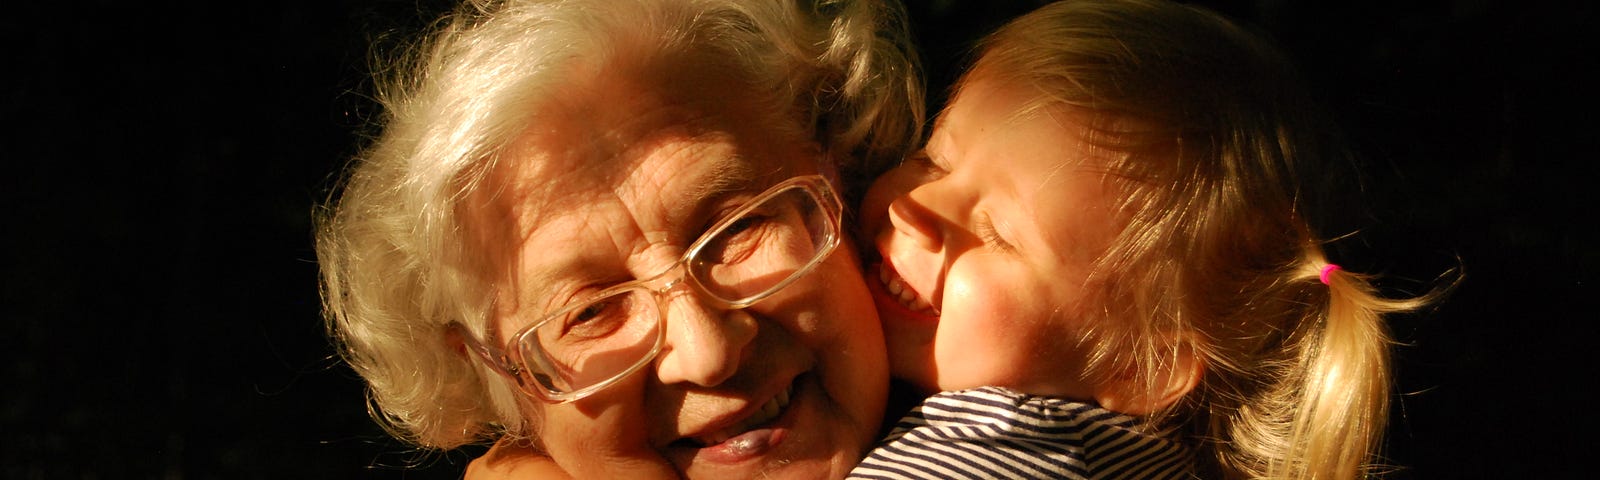 Photo of an older white woman with white hair and glasses, her wrinkled face smiling as she received a hug from a small girl with pigtails. The blonde toddler has her arms wrapped around the older woman’s neck, and the girl’s face is smiling, with eyes closed, and lips close to the older woman’s cheek. The background of the photo is dark, and both people are lit by a bright light, like the sun coming through a window. They both look happy.